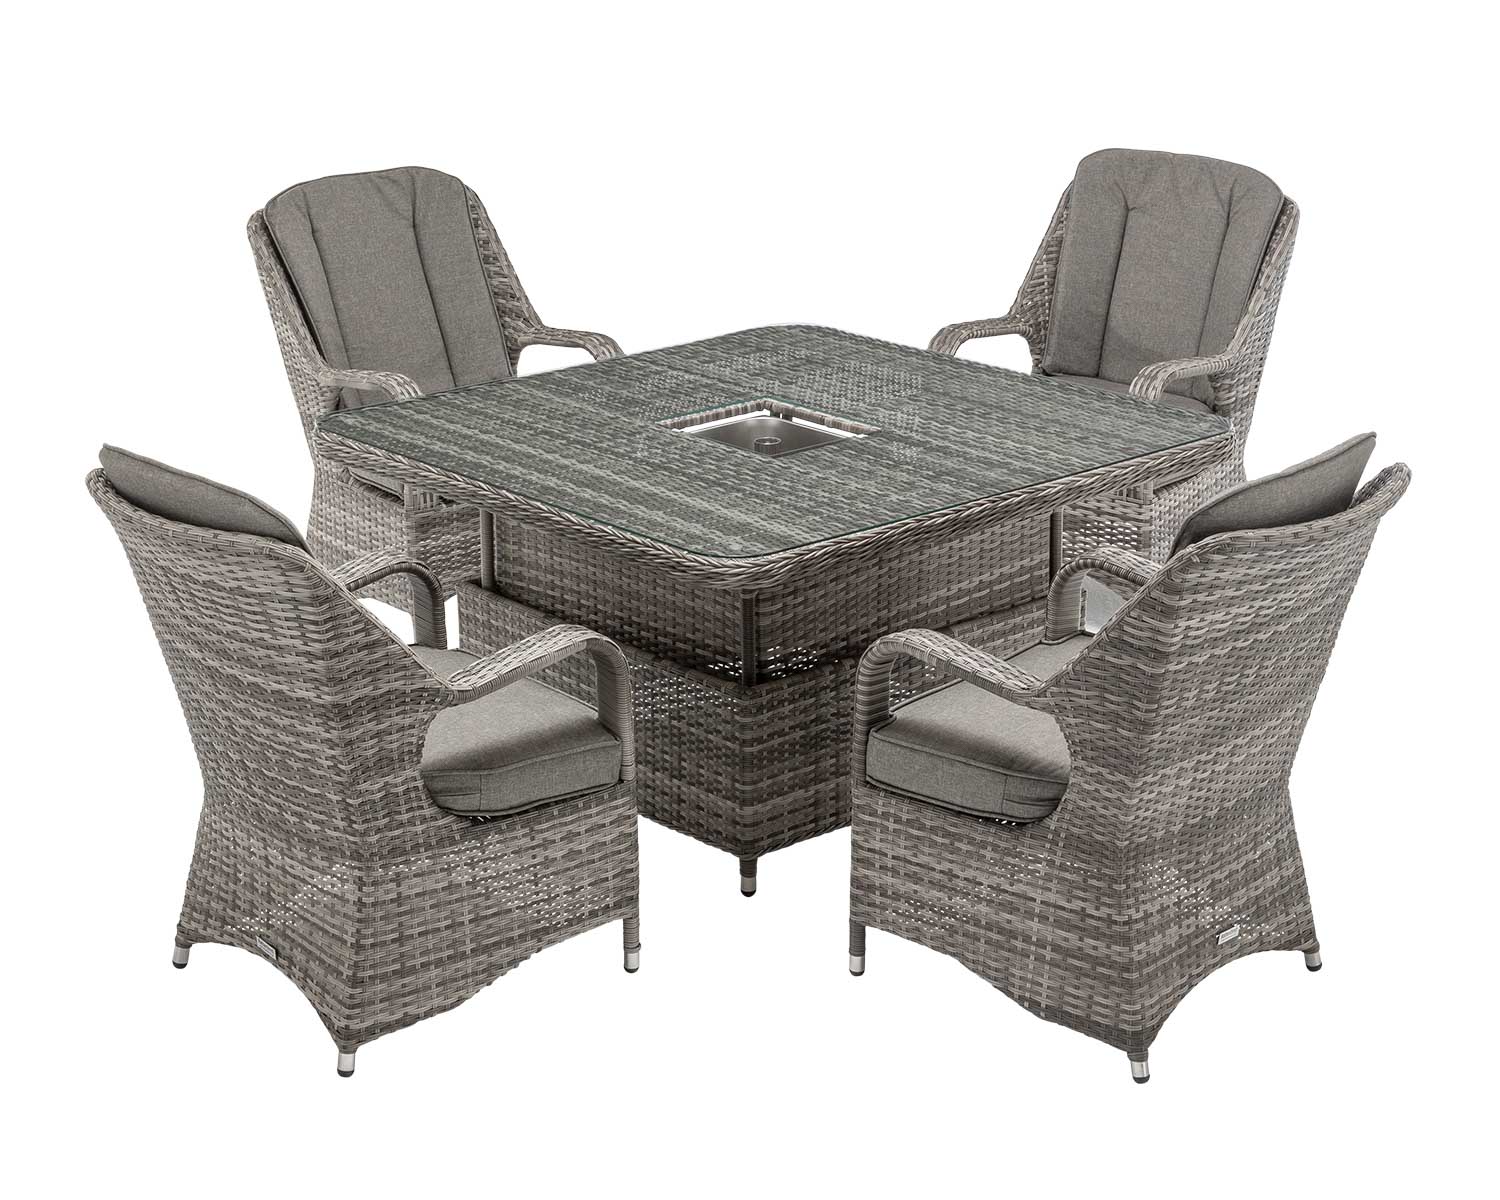 4 Seat Rattan Garden Dining Set With Square Table In Grey With Ice Bucket Marseille Rattan Direct